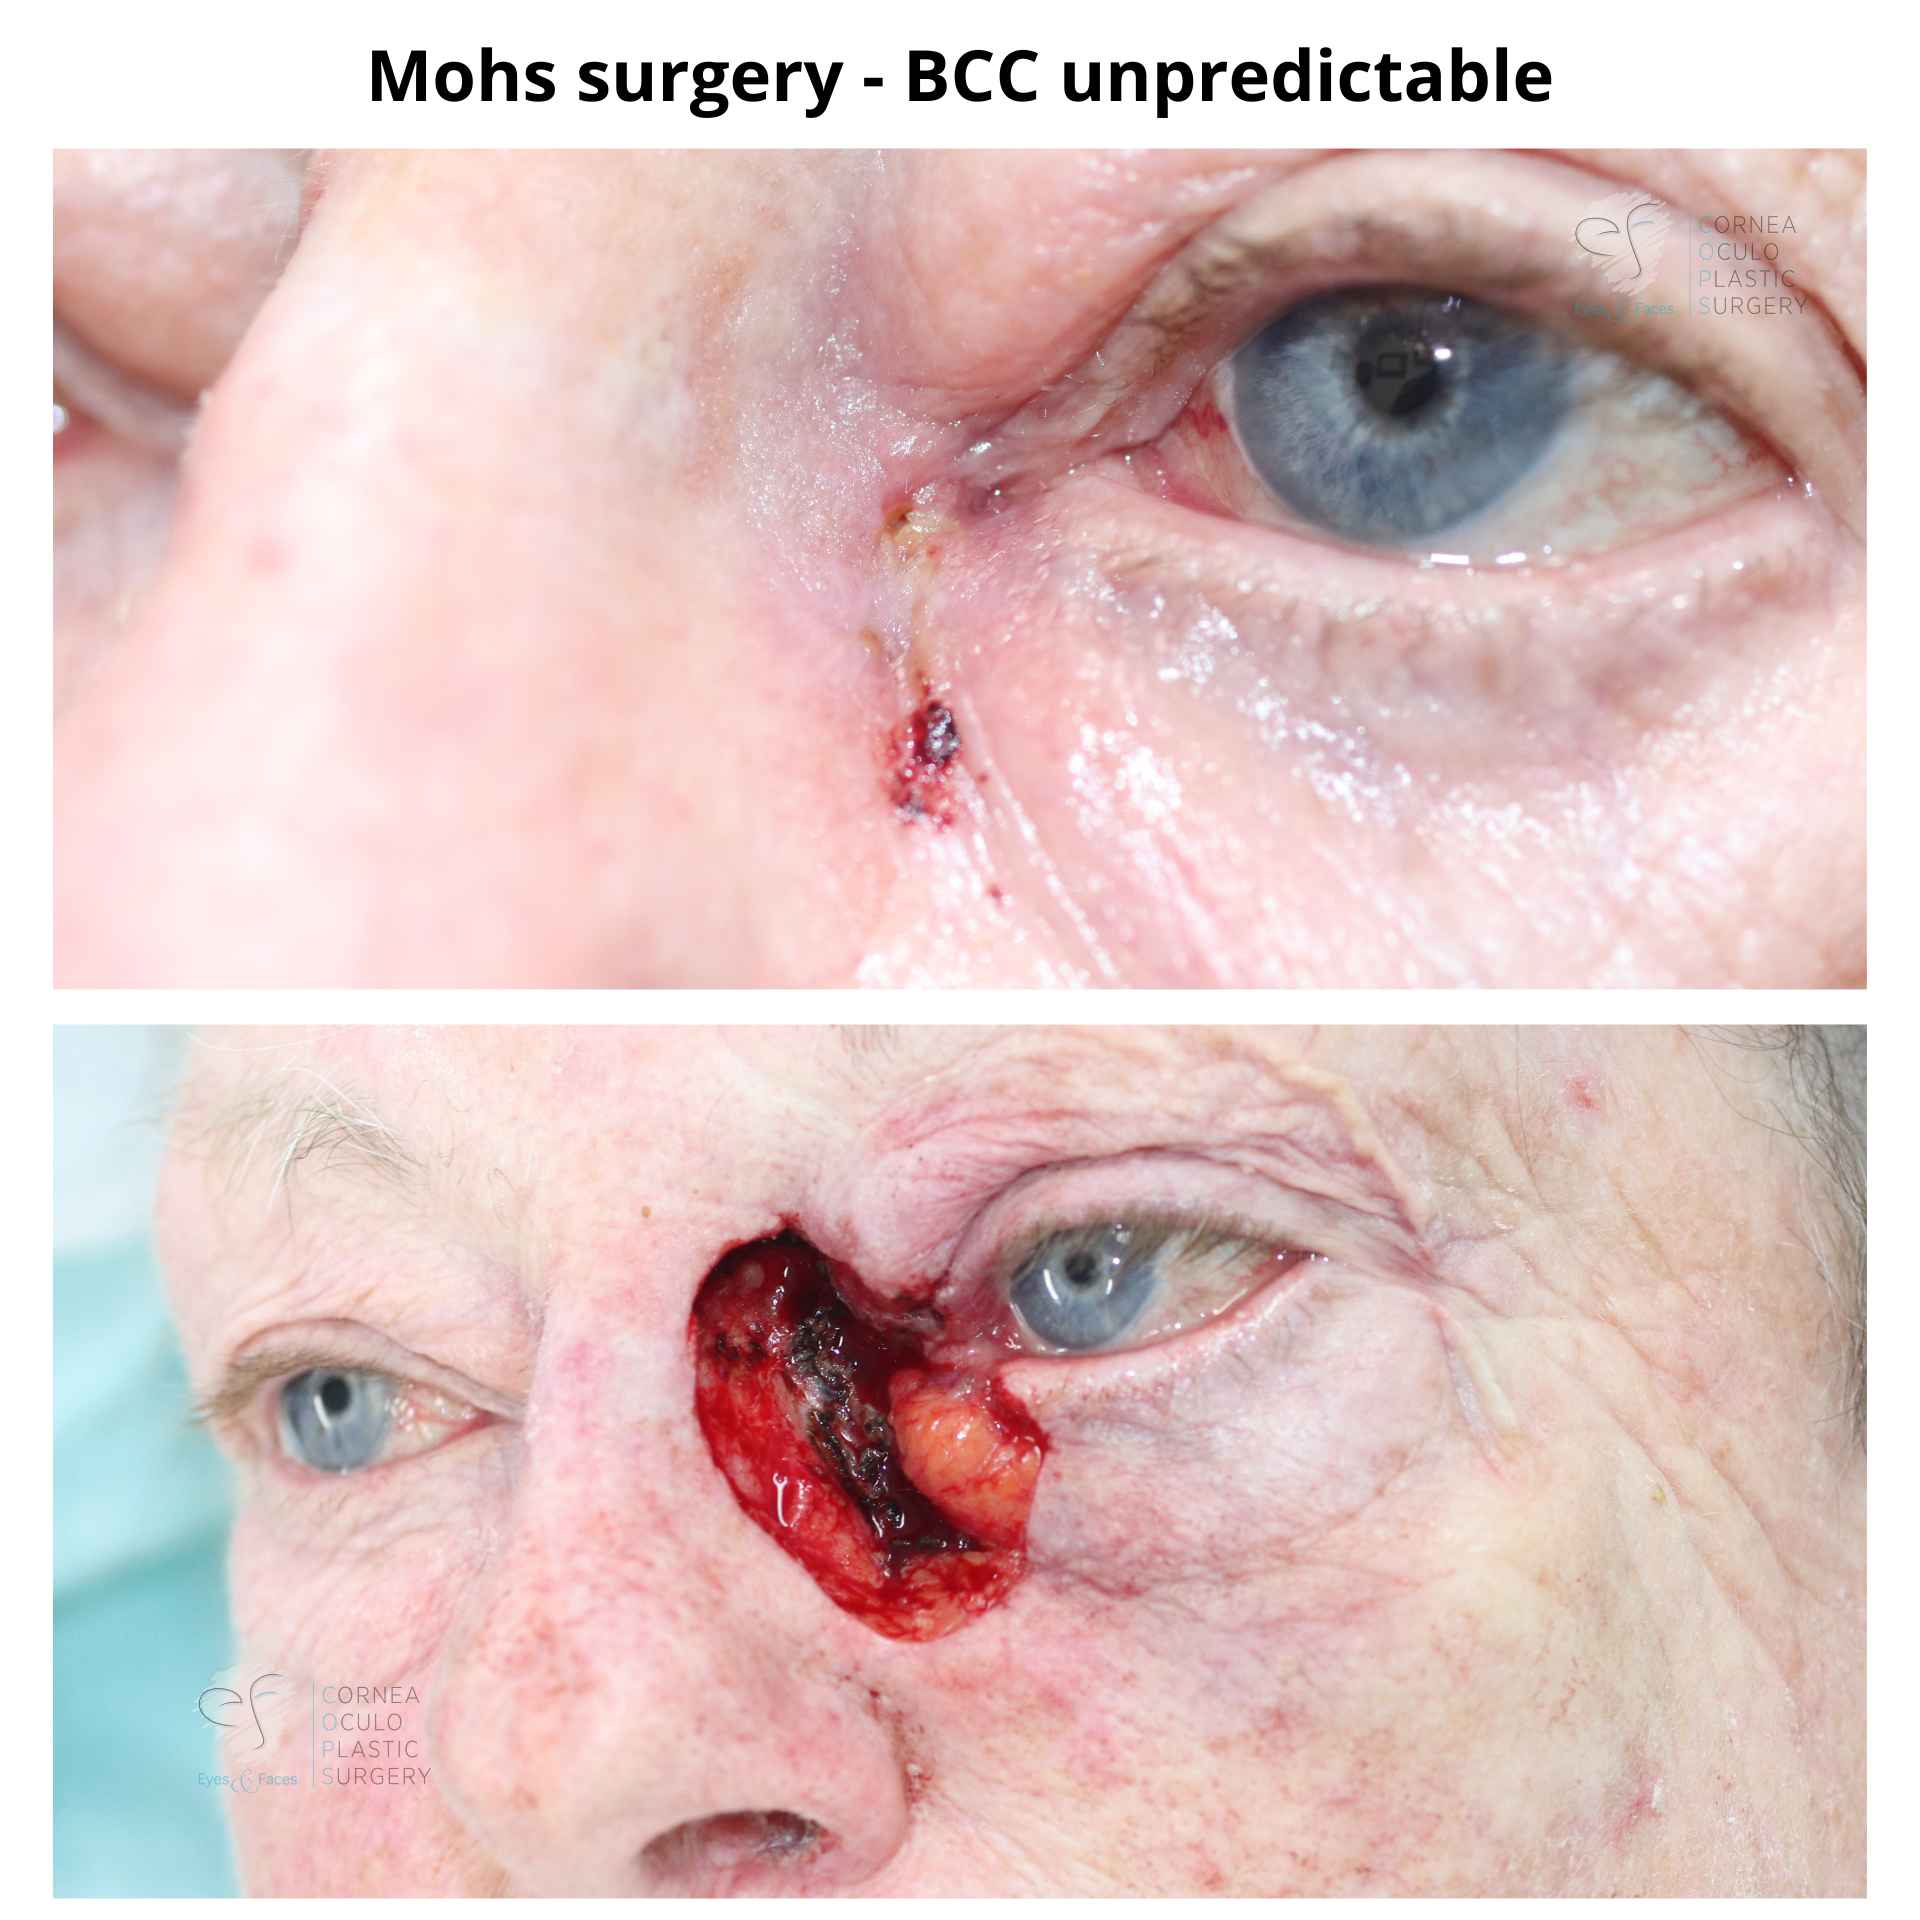 Mohs surgery. Skin cancer before surgery and defect left behind after removing the skin cancer via Mohs surgery.